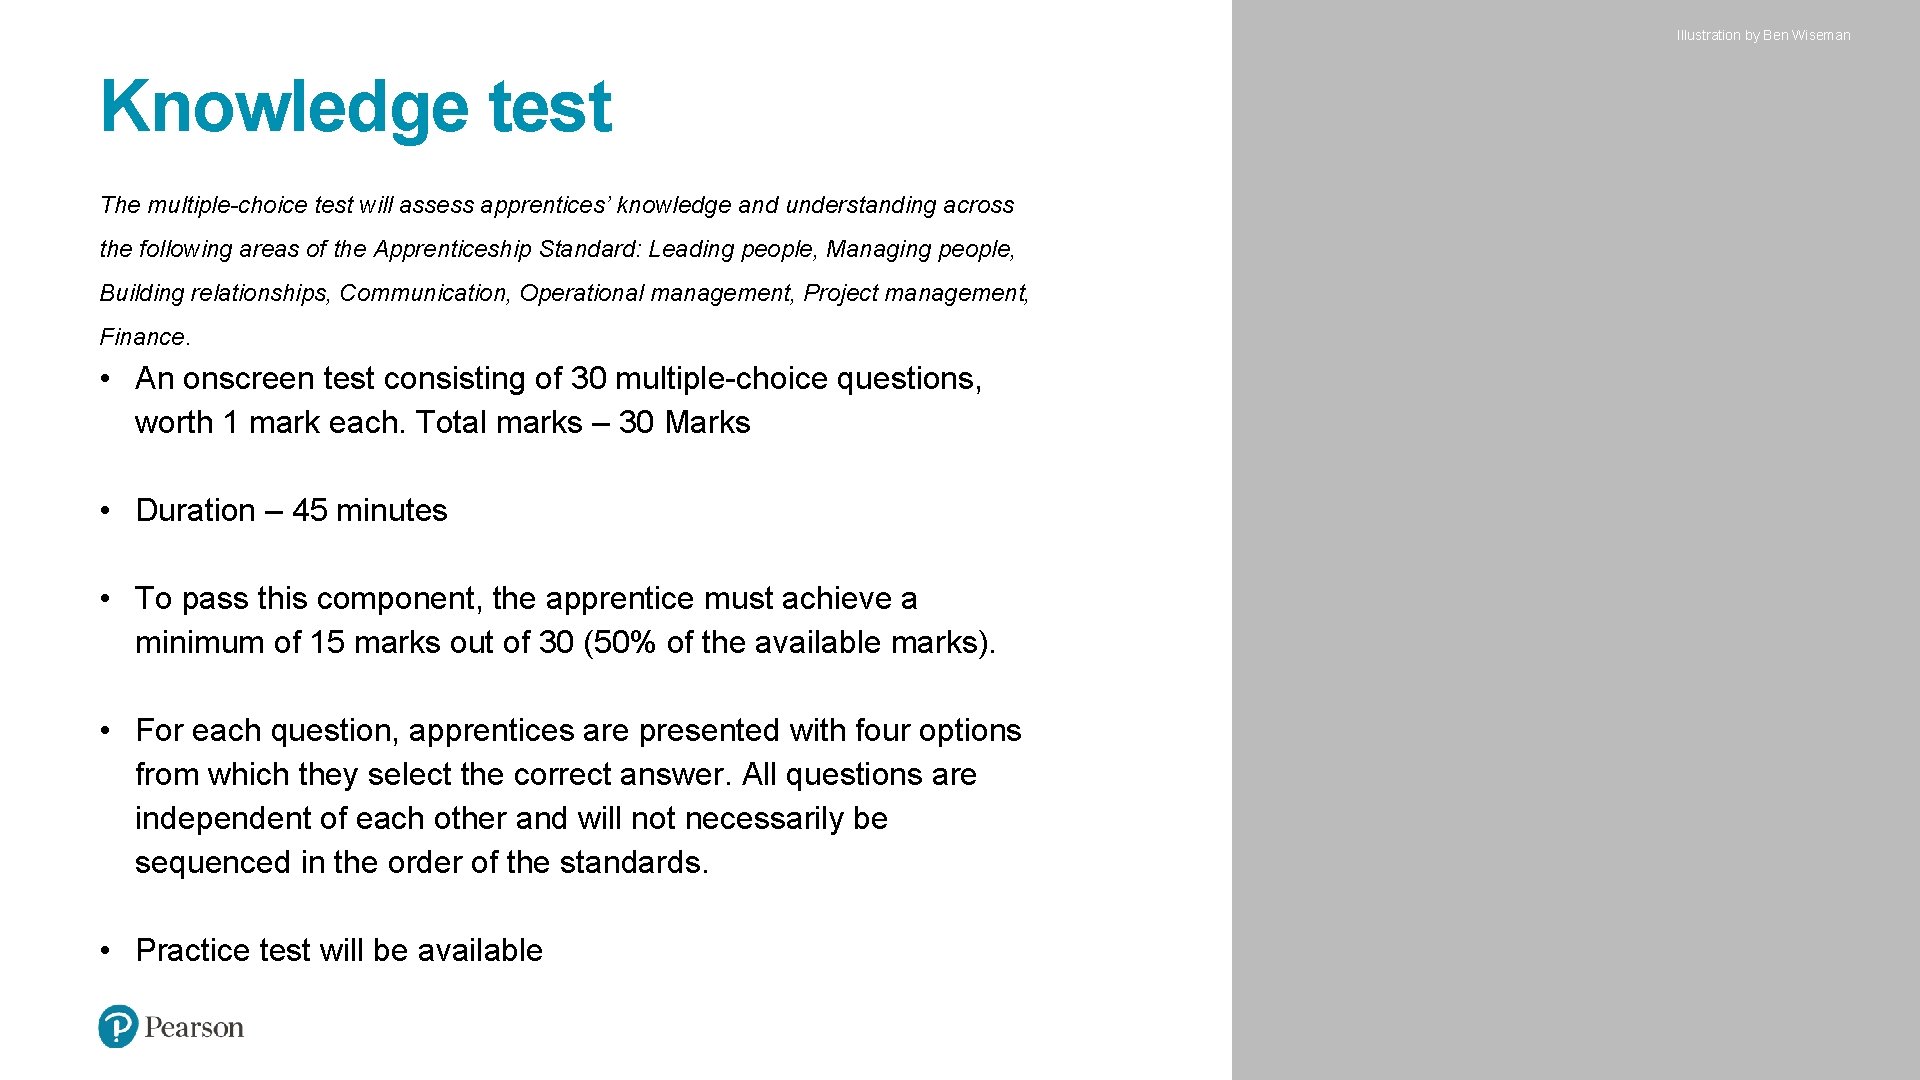 Illustration by Ben Wiseman Knowledge test The multiple-choice test will assess apprentices’ knowledge and